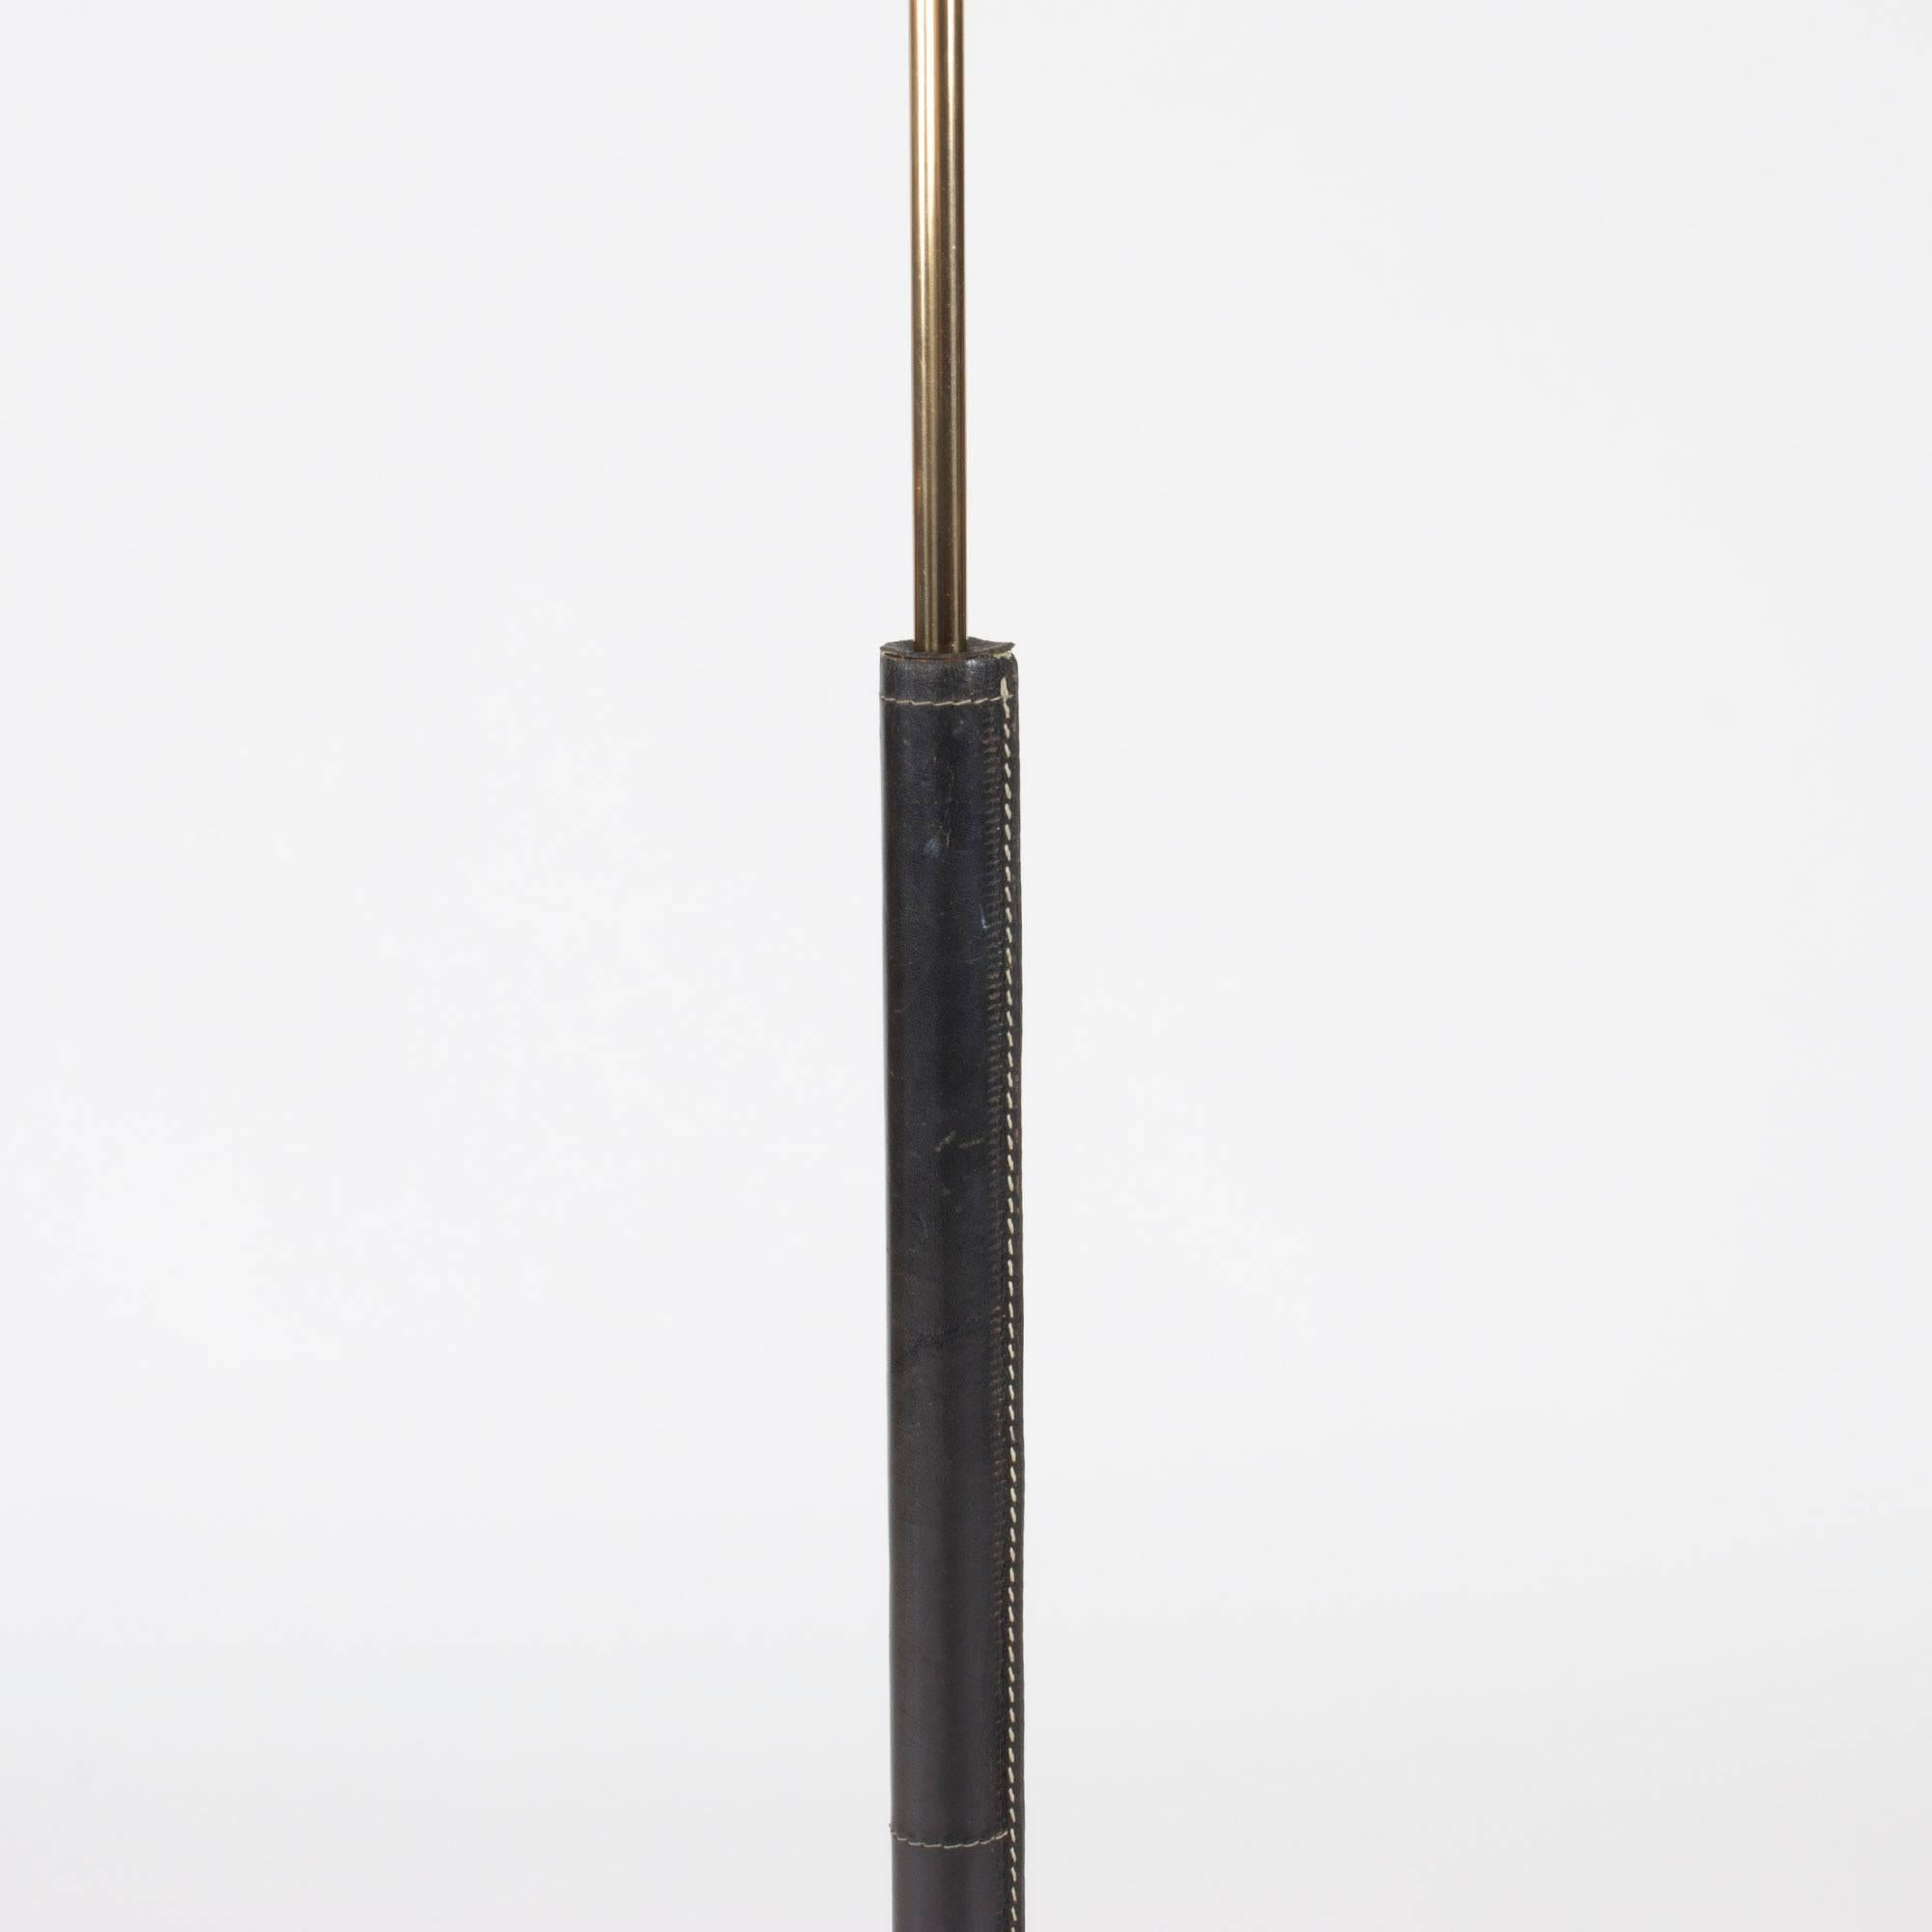 Cool floor lamp from Bergboms with a leather-clad brass pole and foot. Black leather with contrasting white seams.

Bergboms was a successful Swedish lighting firm which manufactured both own designs and those of international designers such as